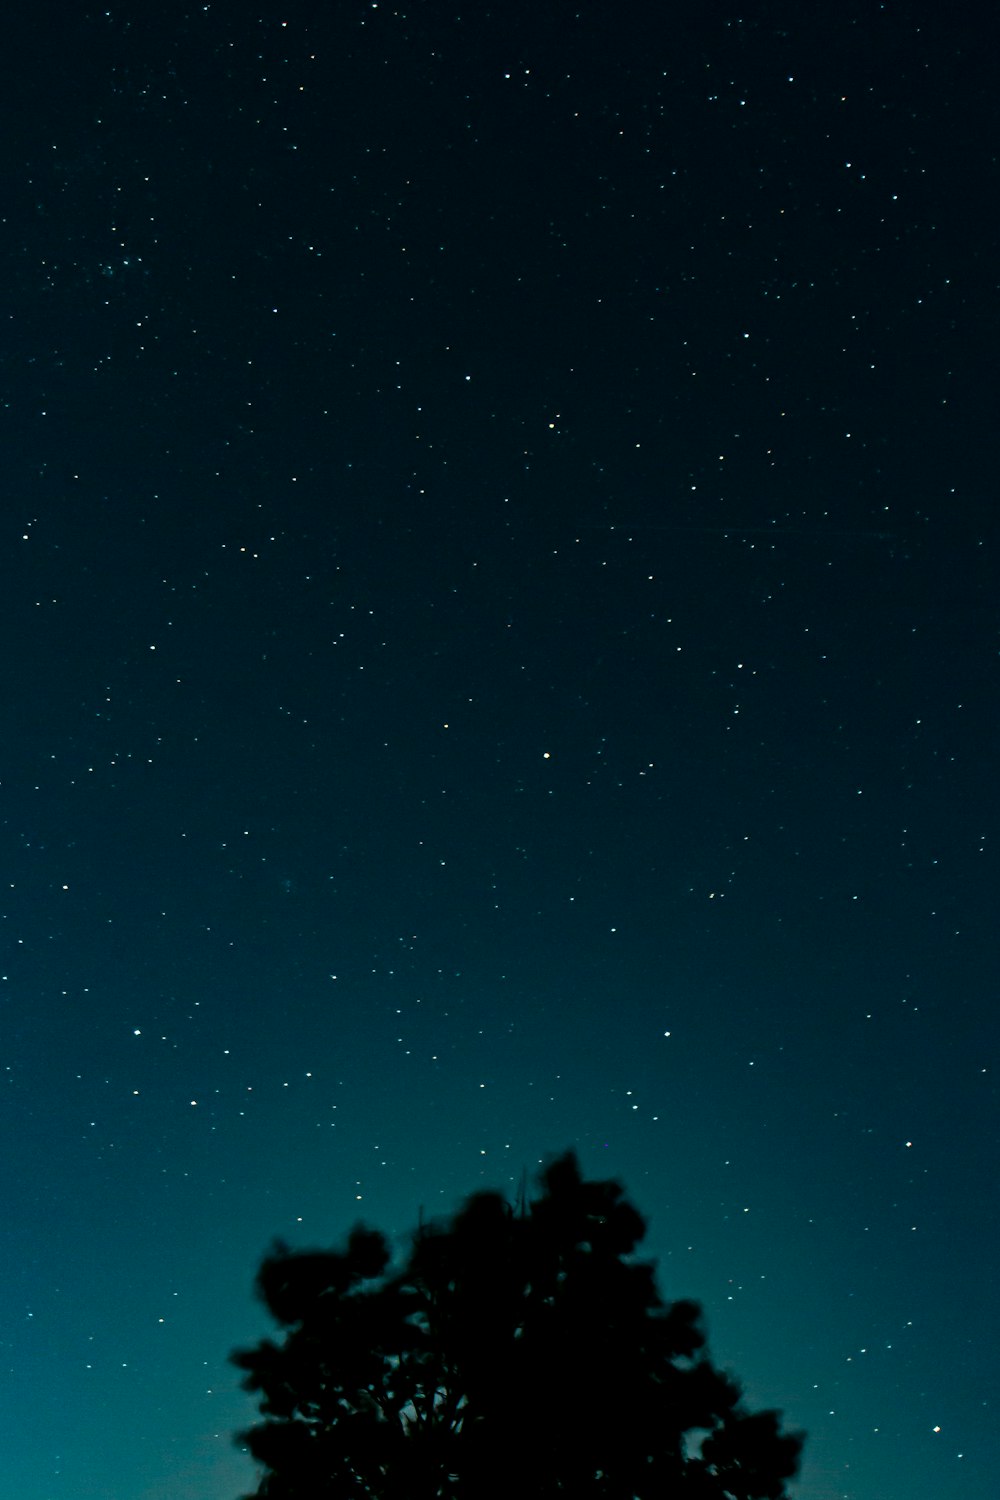 blue sky with stars during night time